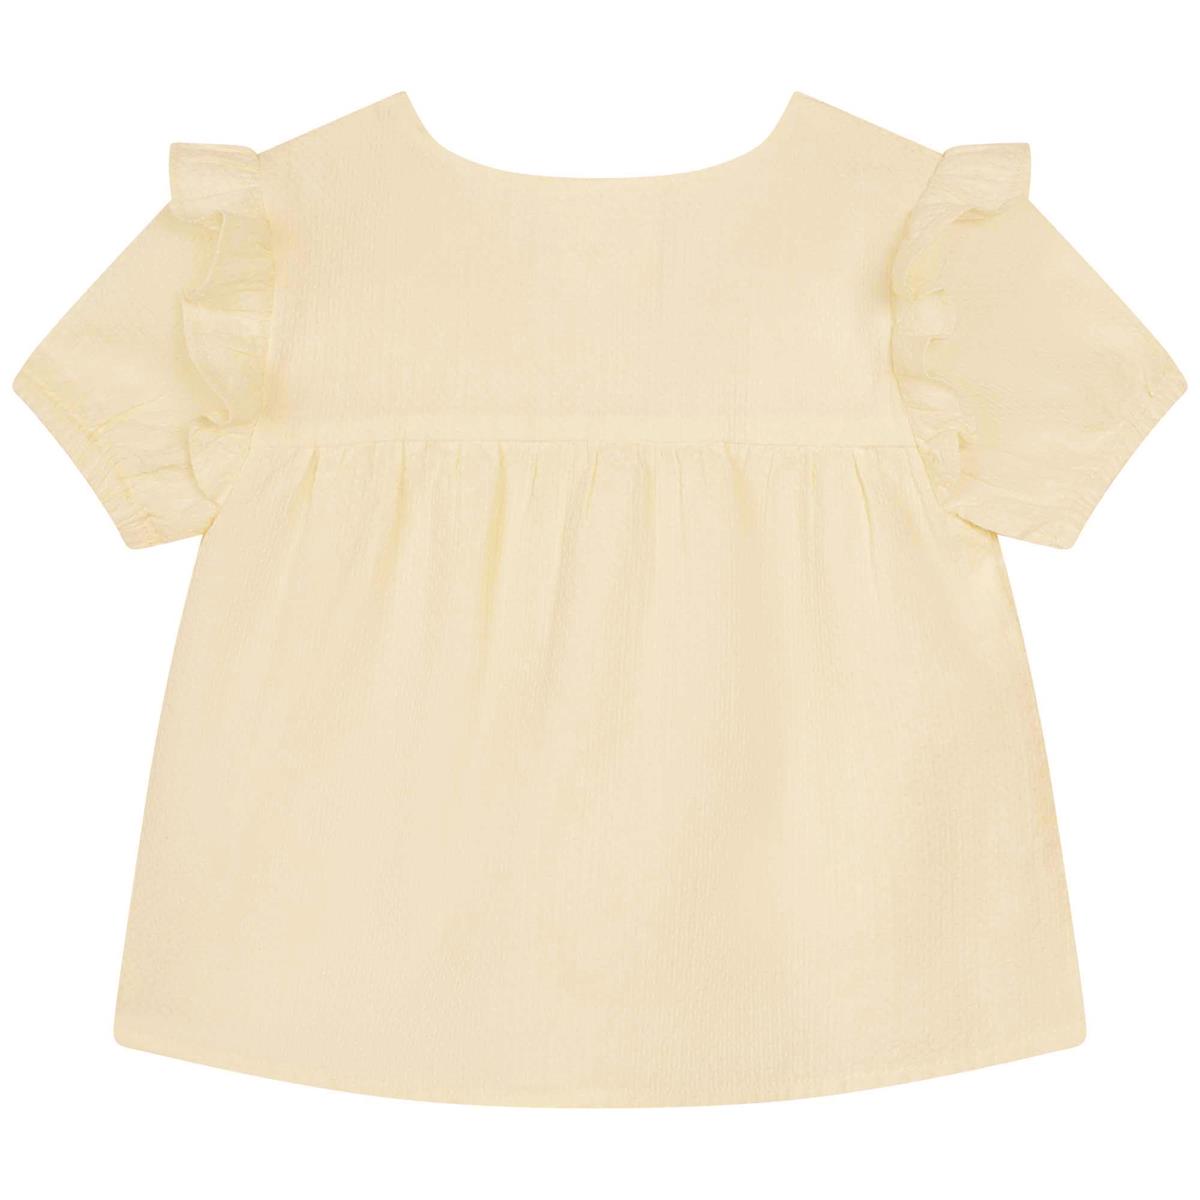 Girls Cream Embroidered Top